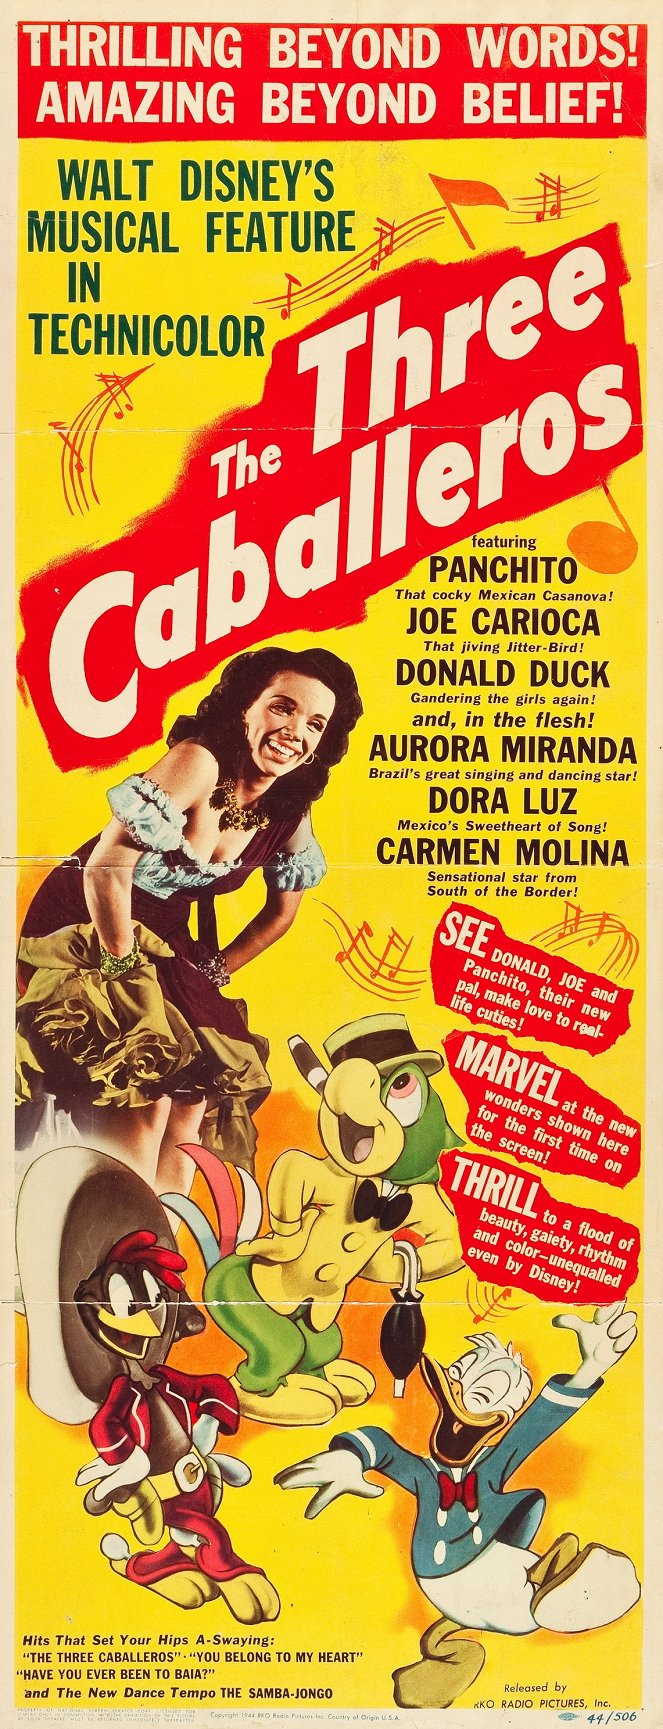 The Three Caballeros - Posters